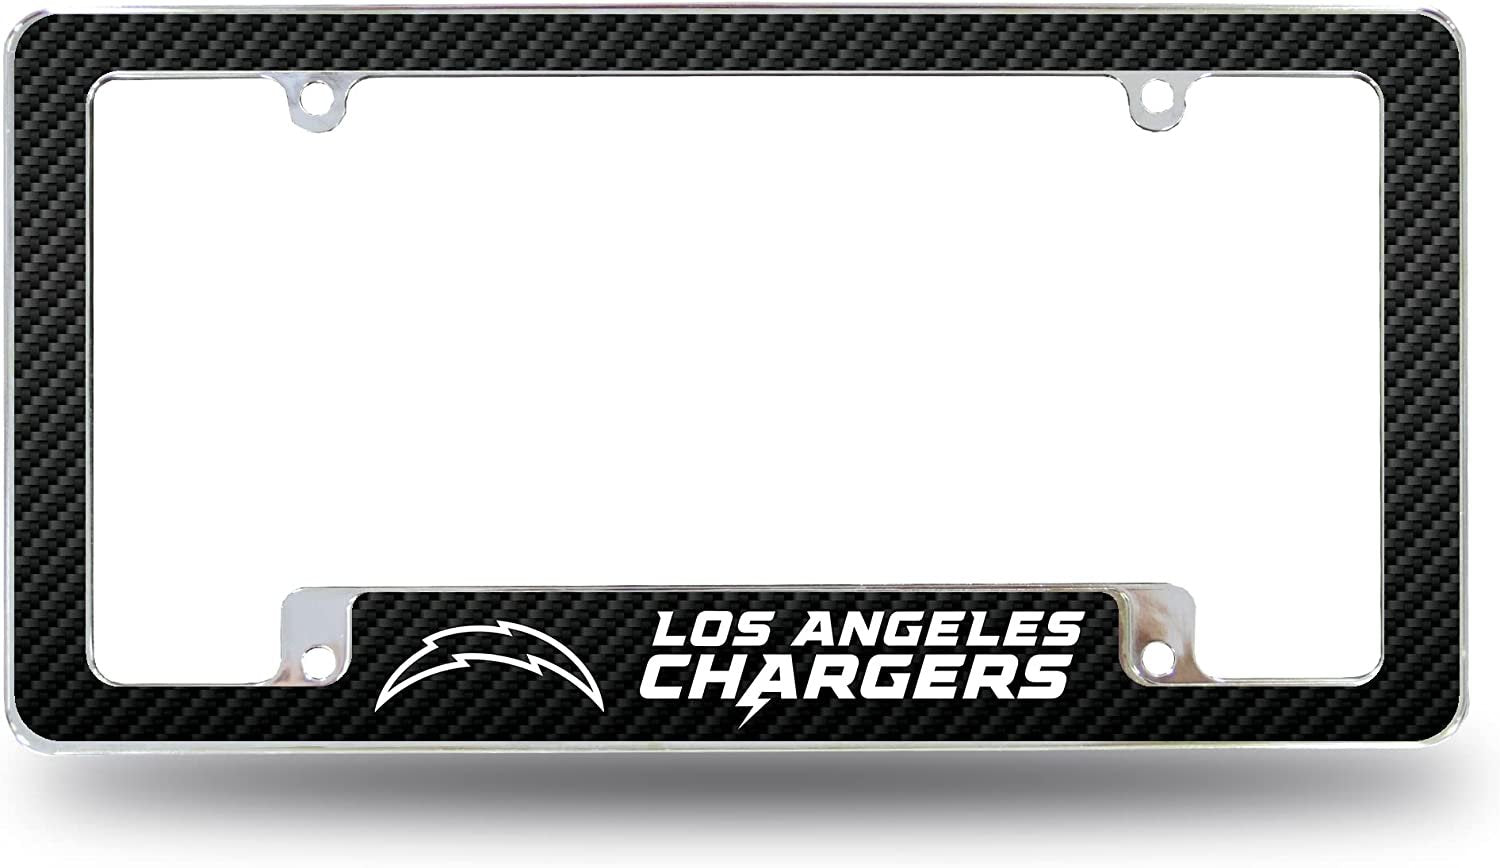 Los Angeles Chargers Metal License Plate Frame Chrome Tag Cover Carbon Fiber Design 6x12 Inch